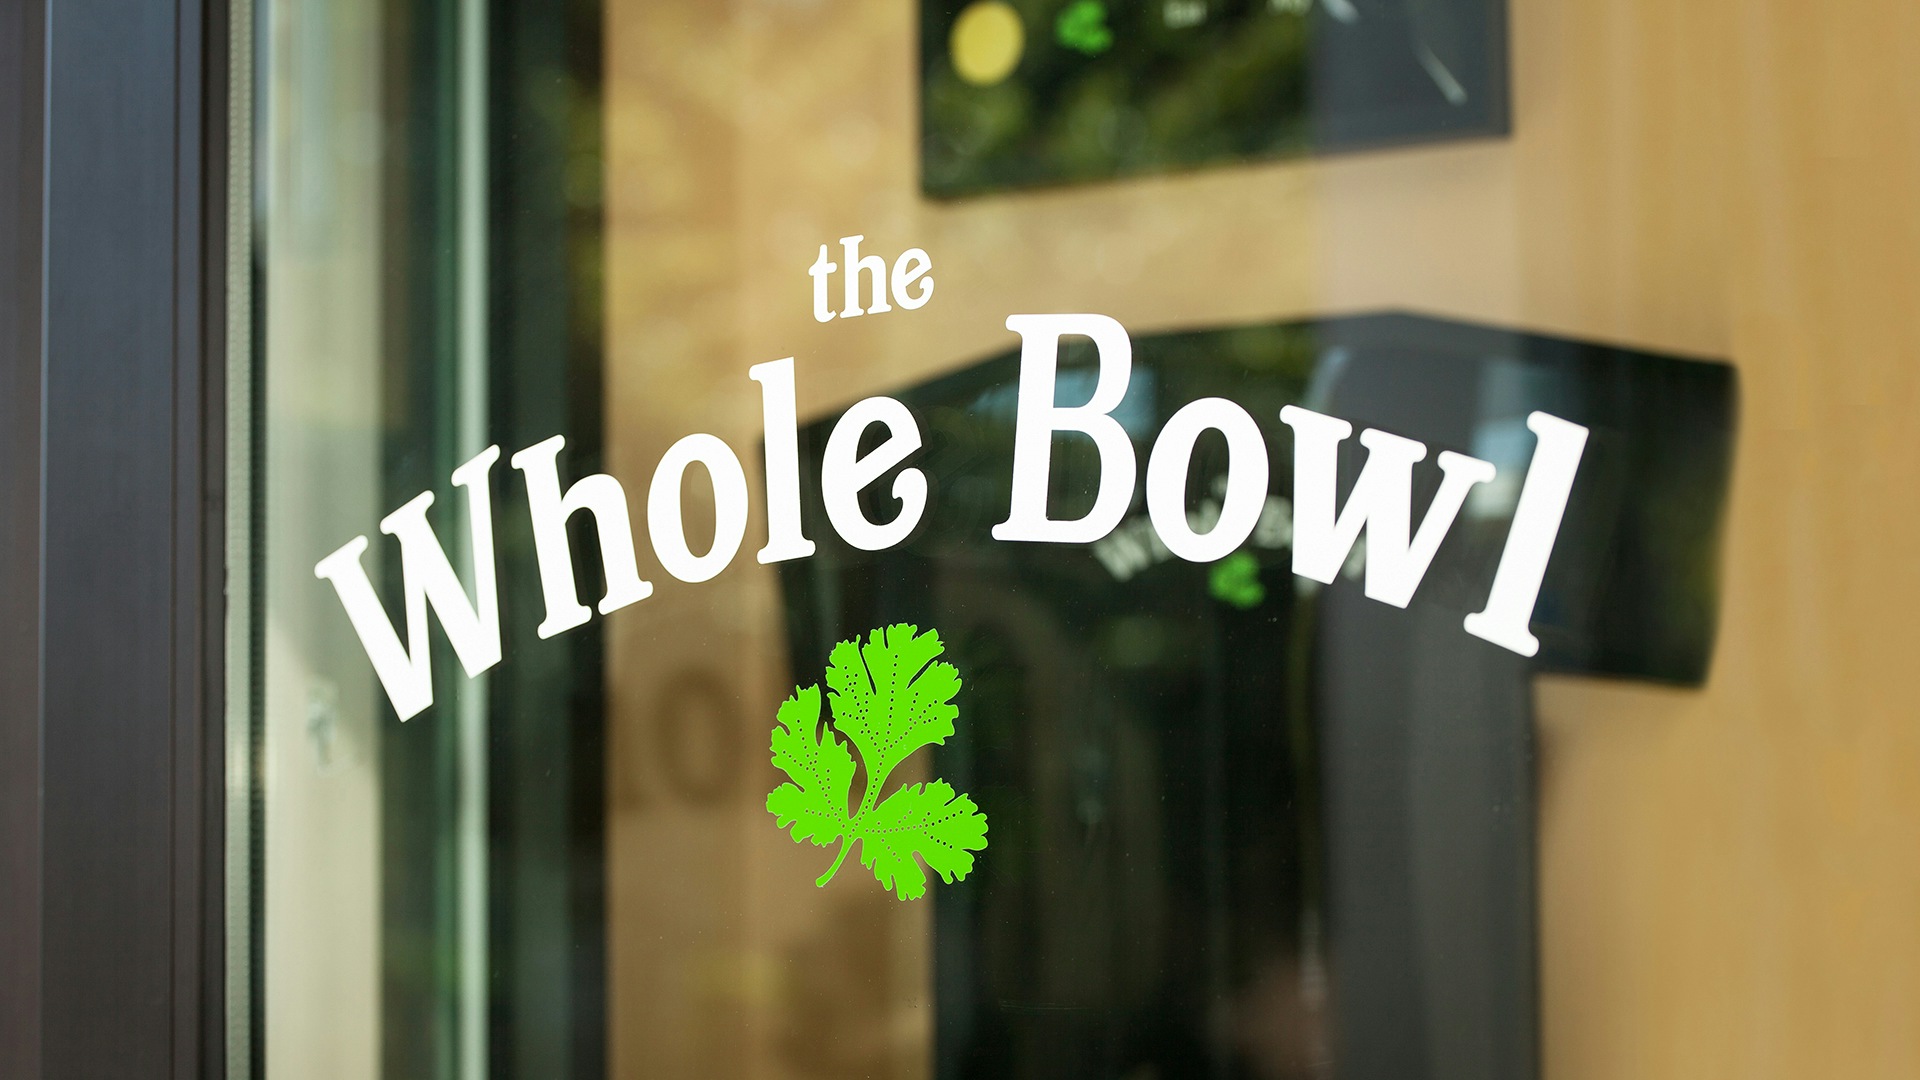 The Whole Bowl logo decal on a glass door.